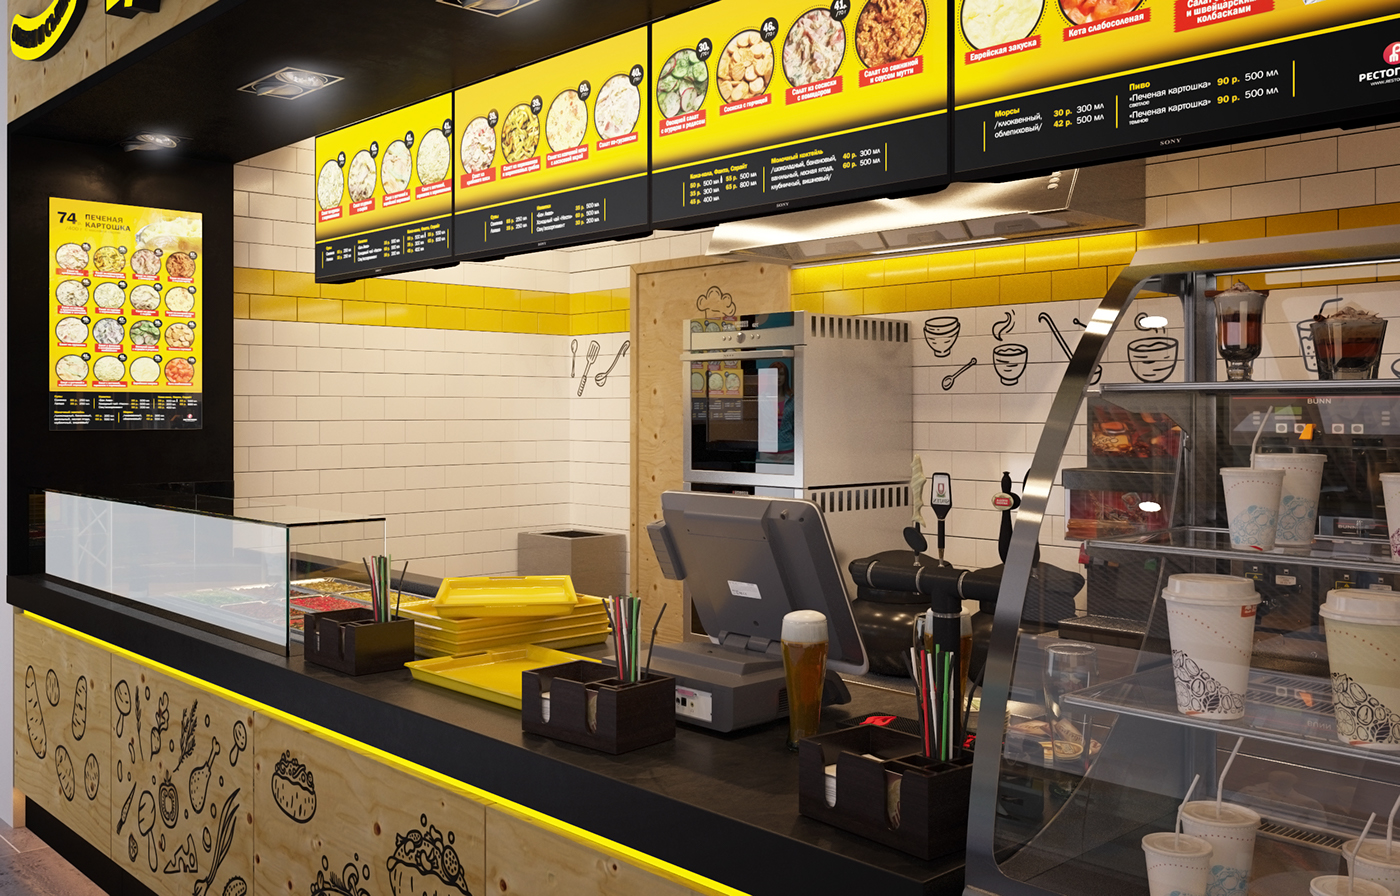 Protestant Badly Reserve Design of the food court cafe on Behance